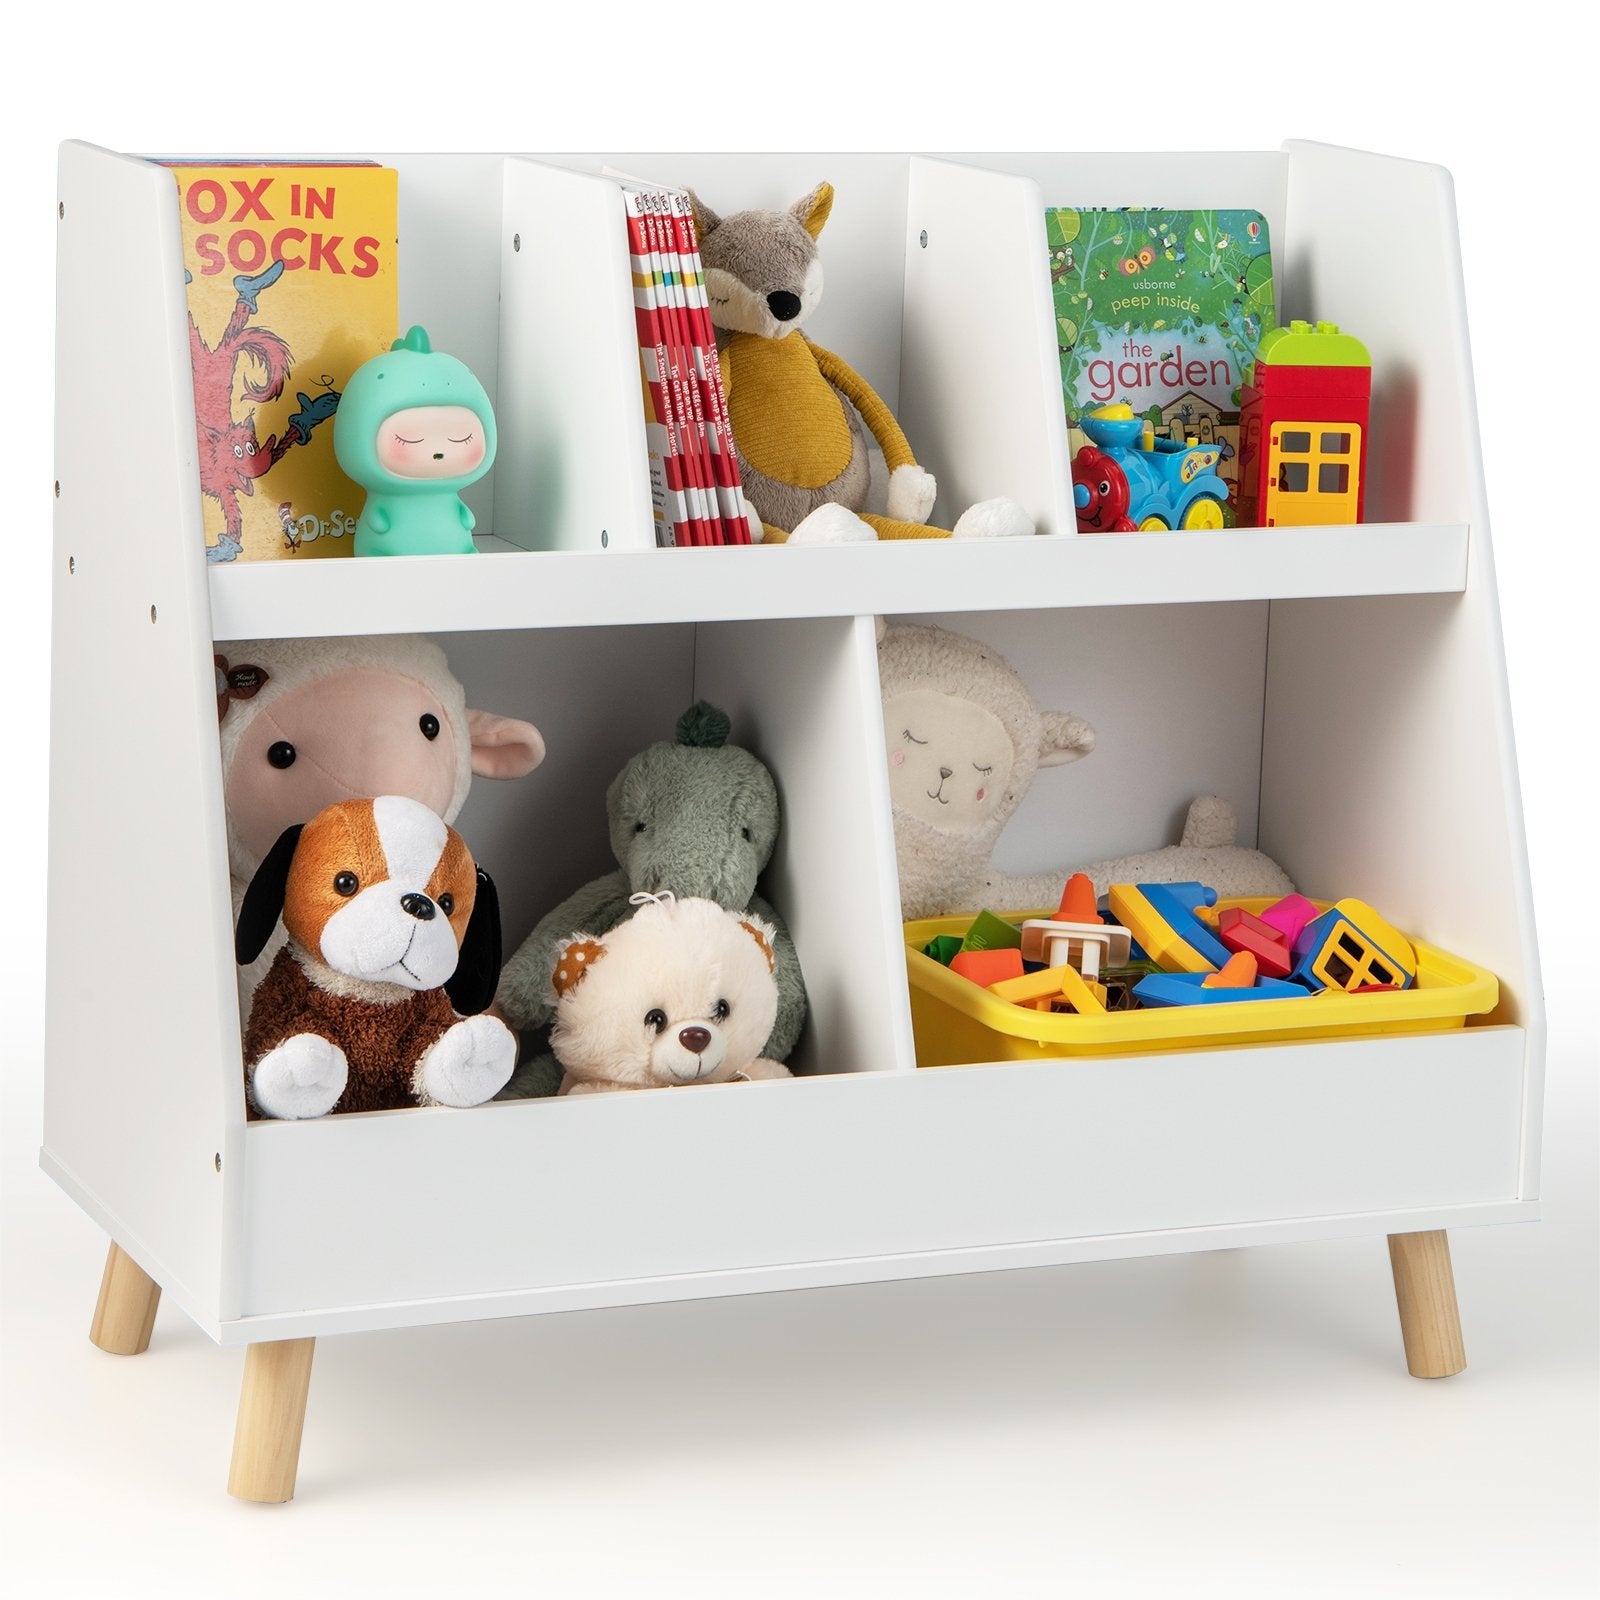 5-Cube Kids Bookshelf and Toy Organizer with Anti-Tipping Kits, White - Gallery Canada